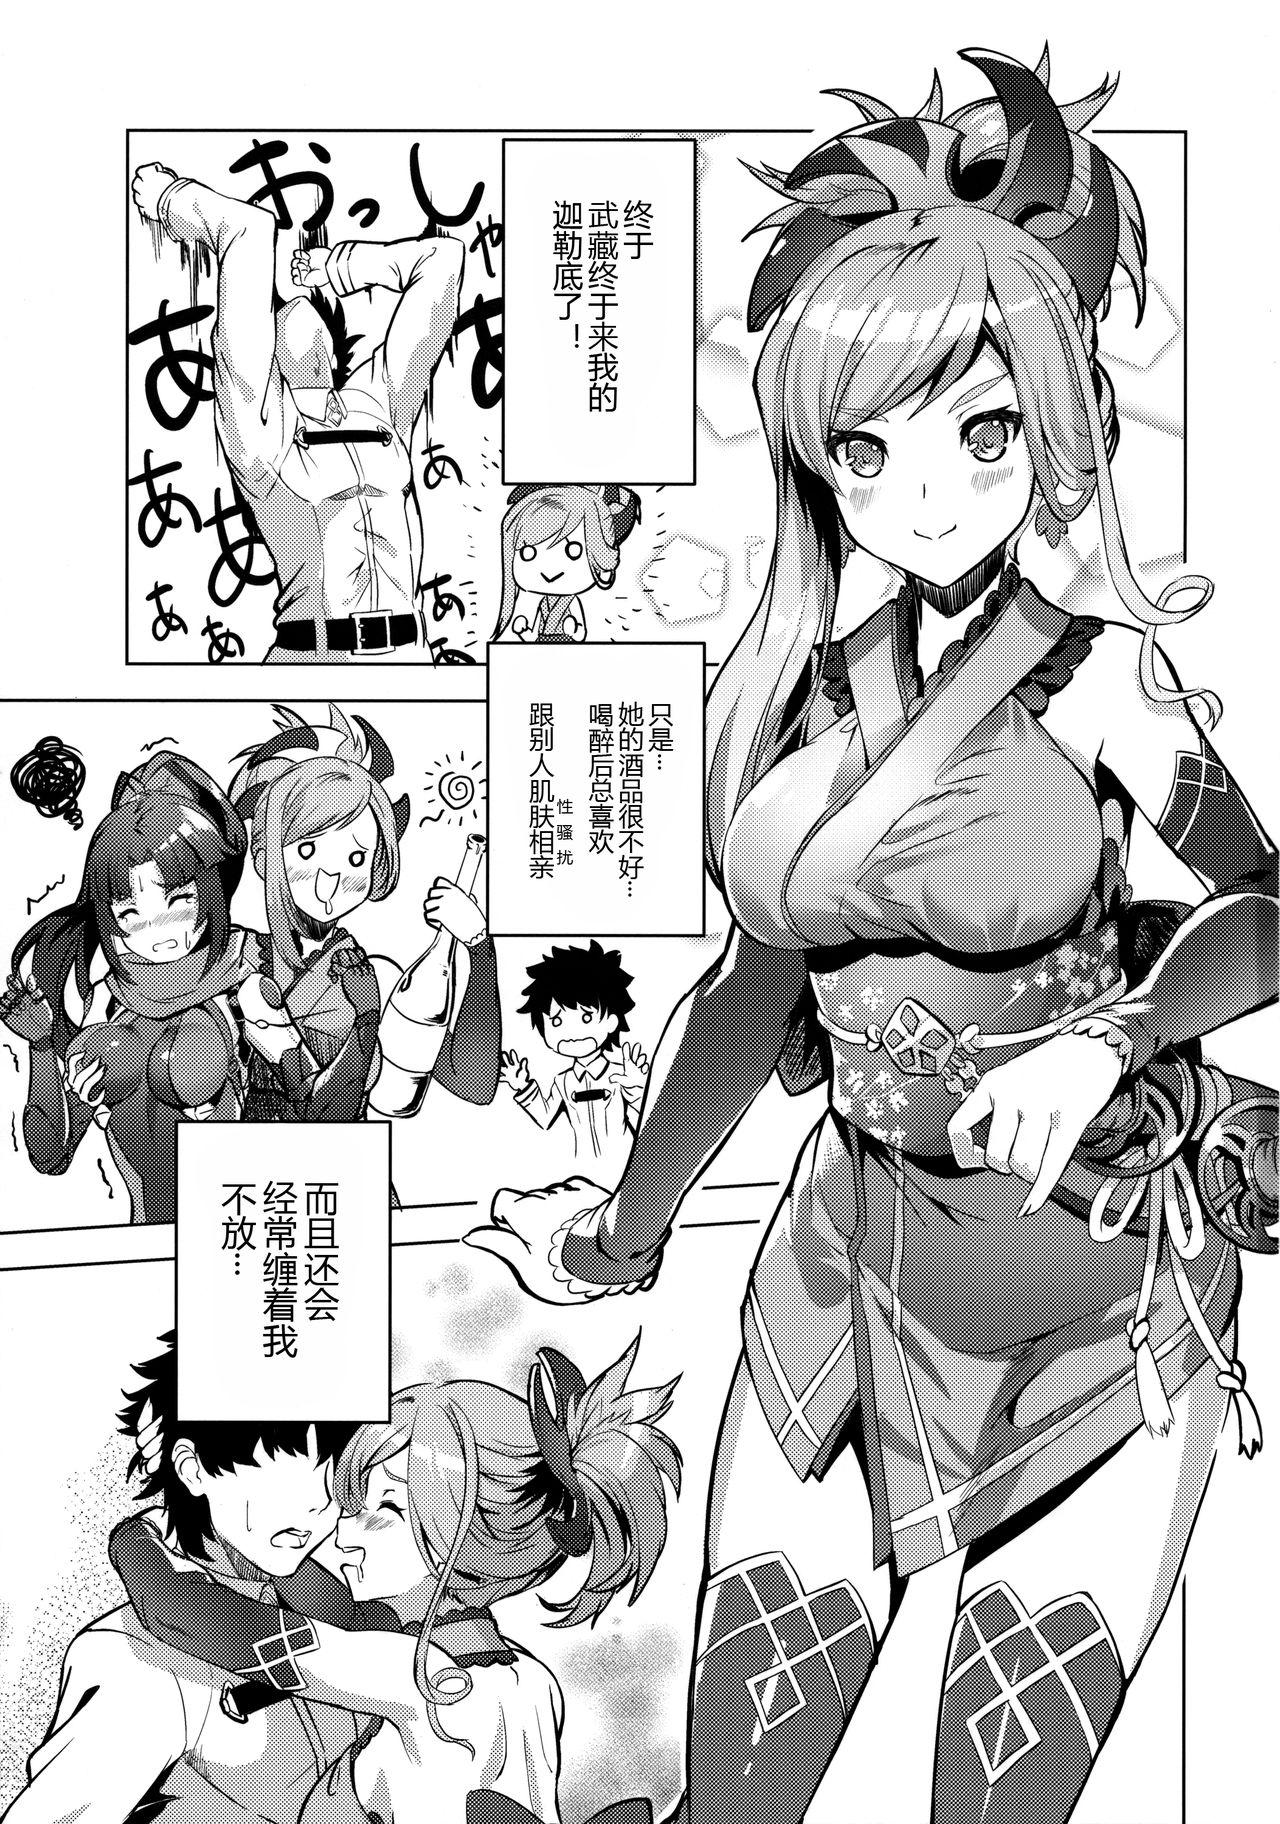 Gay Solo Musashi-chan no Erohon - Fate grand order Picked Up - Page 3